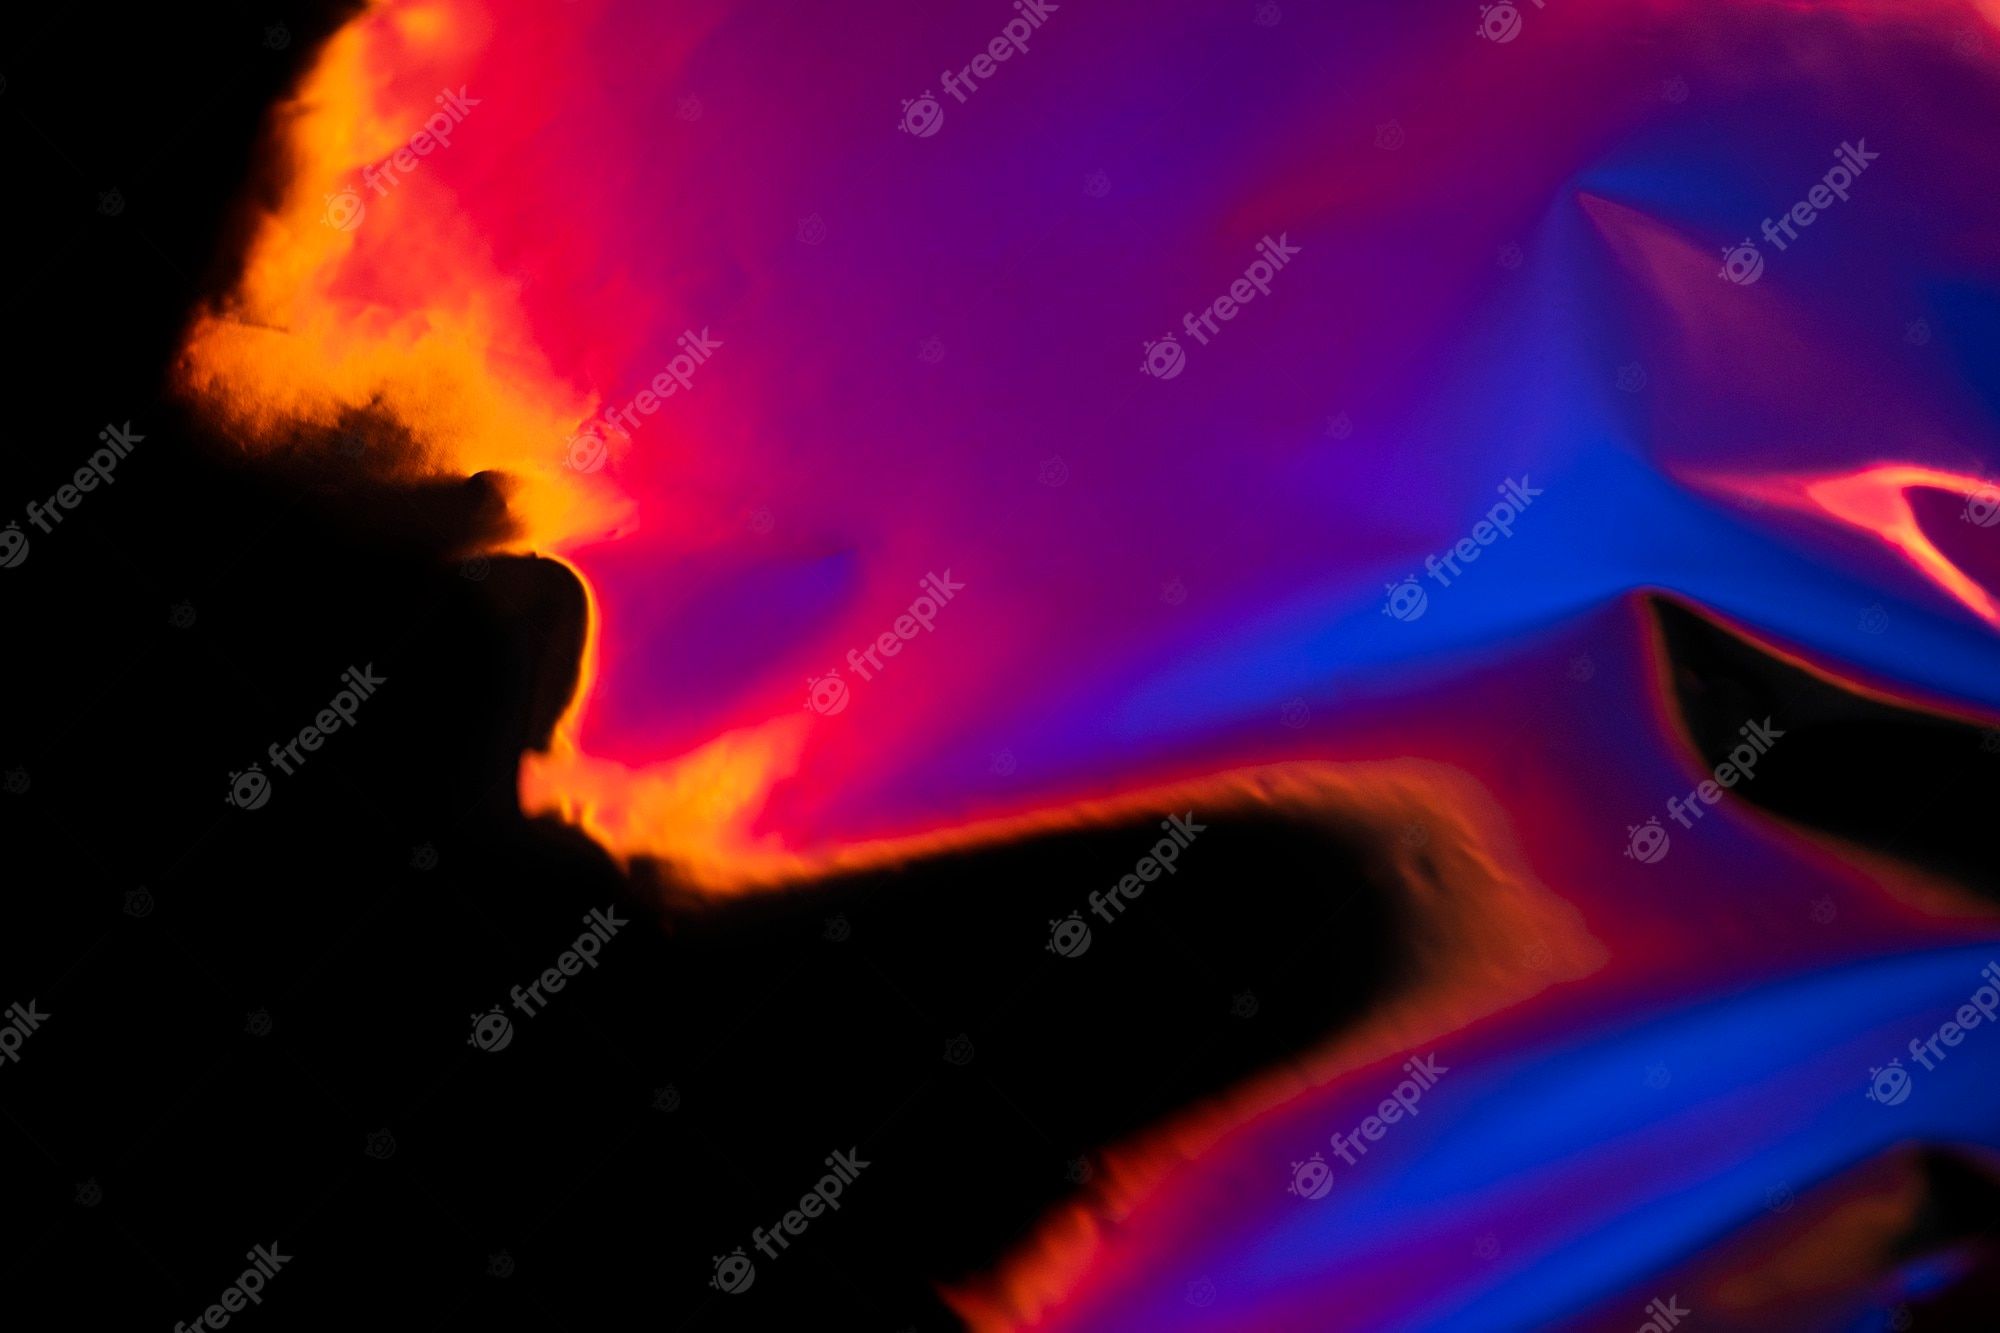 An abstract image of a colorful, flowing liquid - Flames